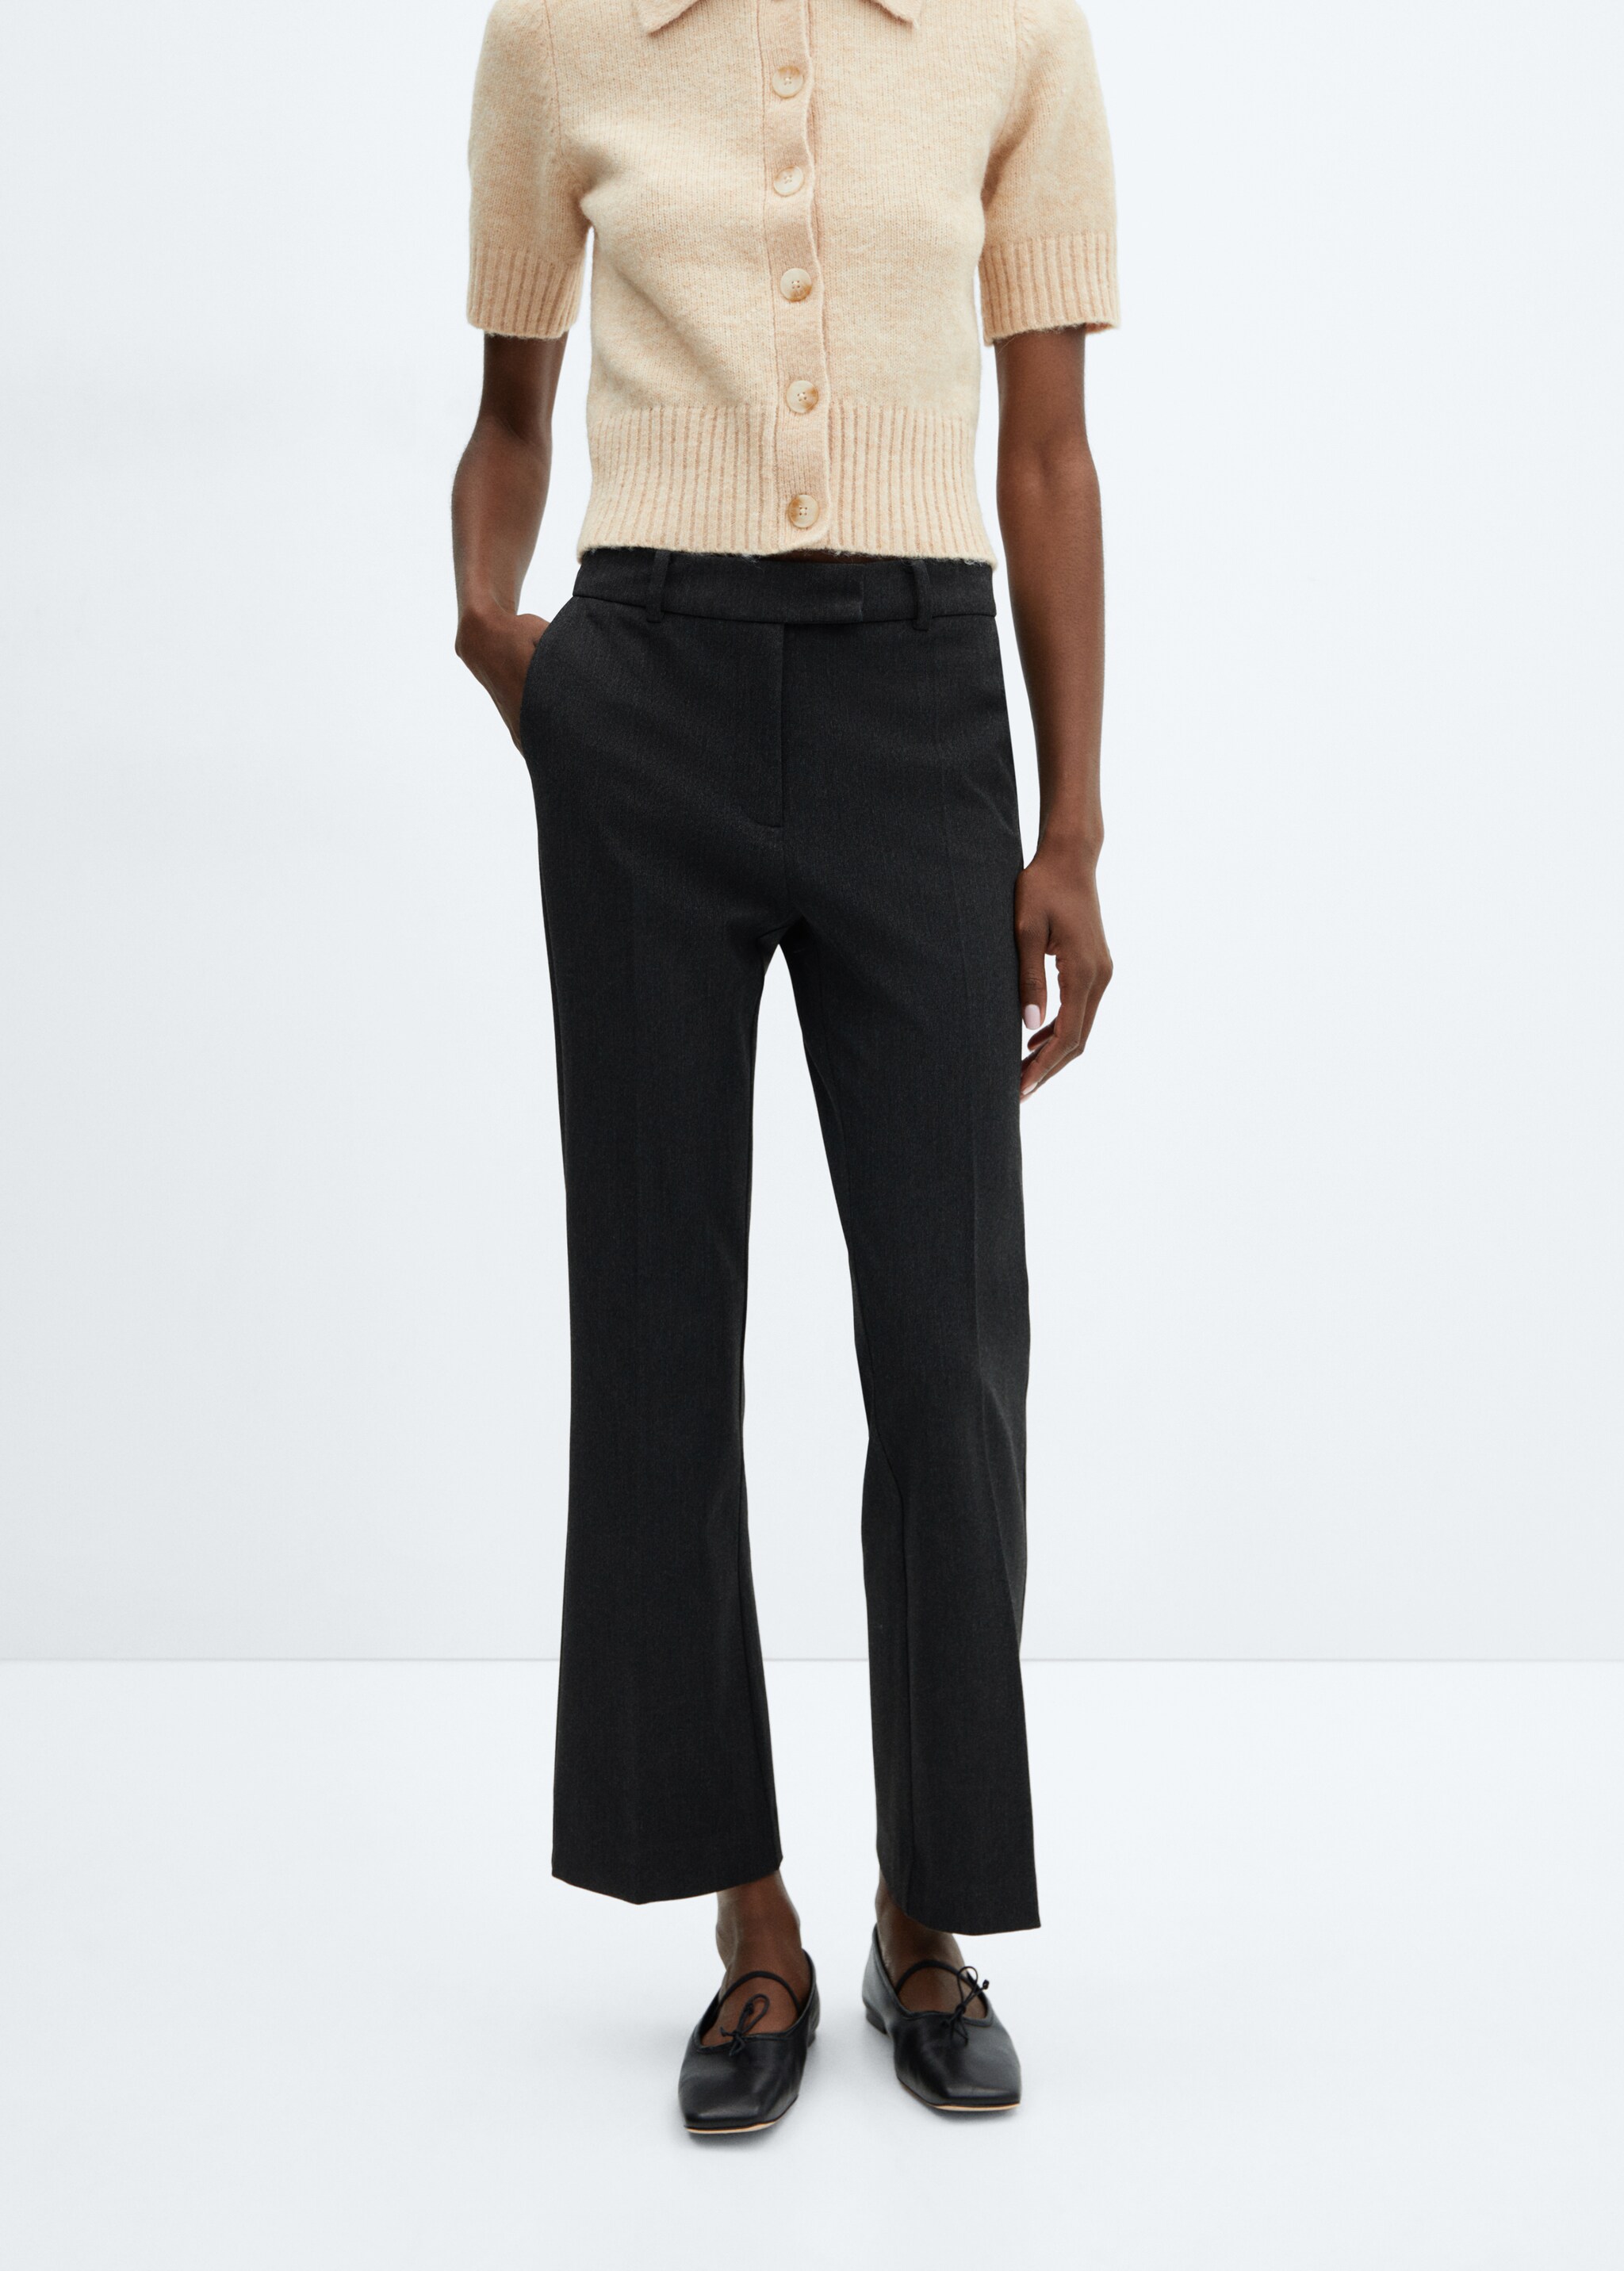 Cropped flared trousers - Medium plane